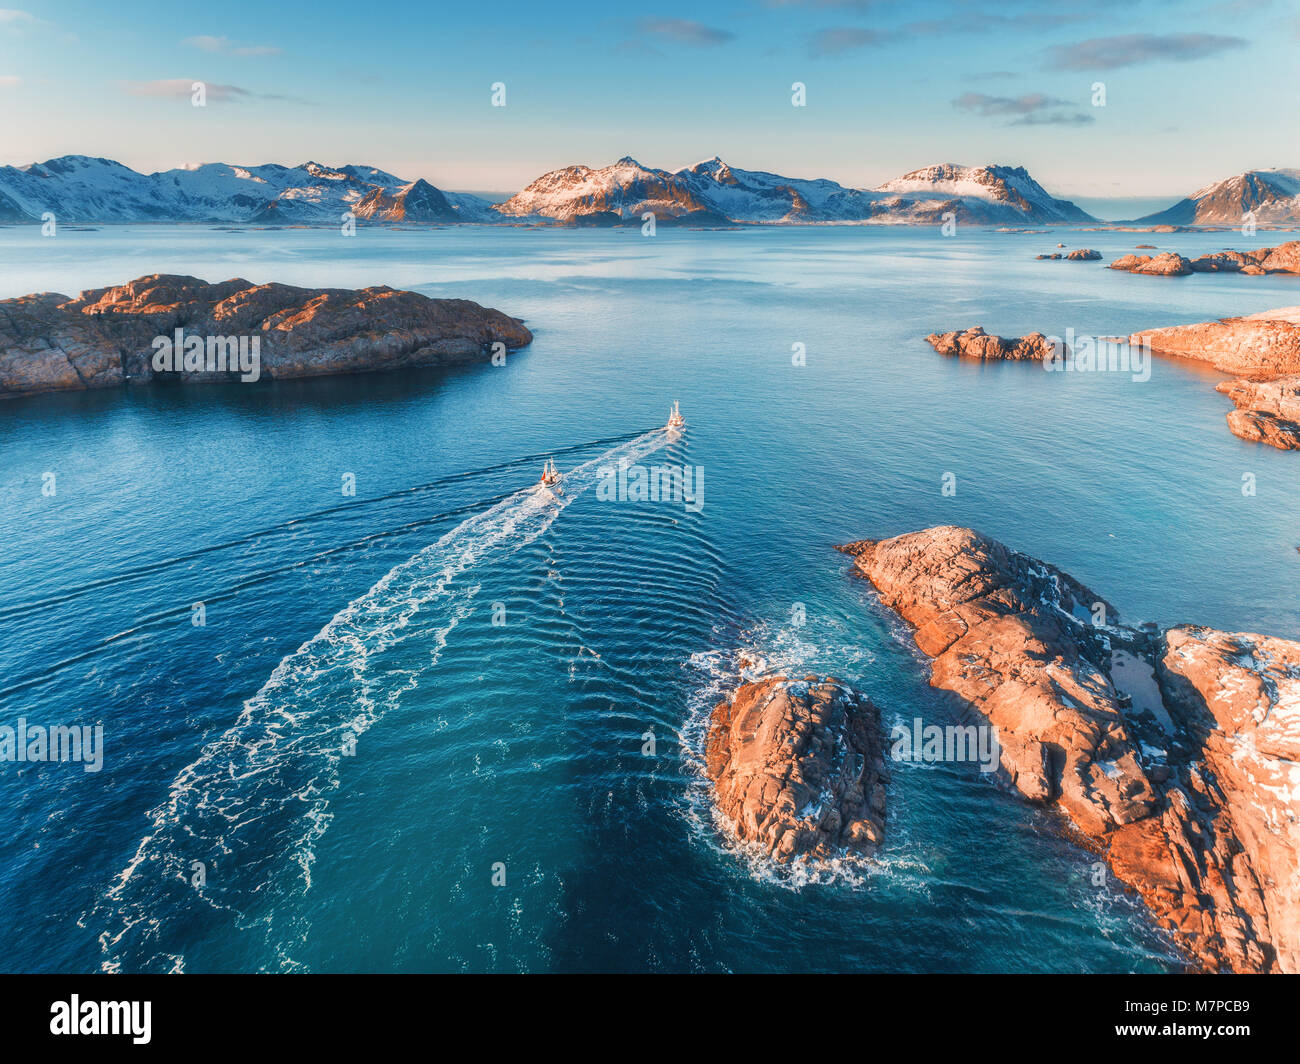 Aerial view of fishing boats, rocks in the blue sea, snowy mountains and colorful sky with clouds at sunset in winter in Lofoten islands, Norway, Land Stock Photo